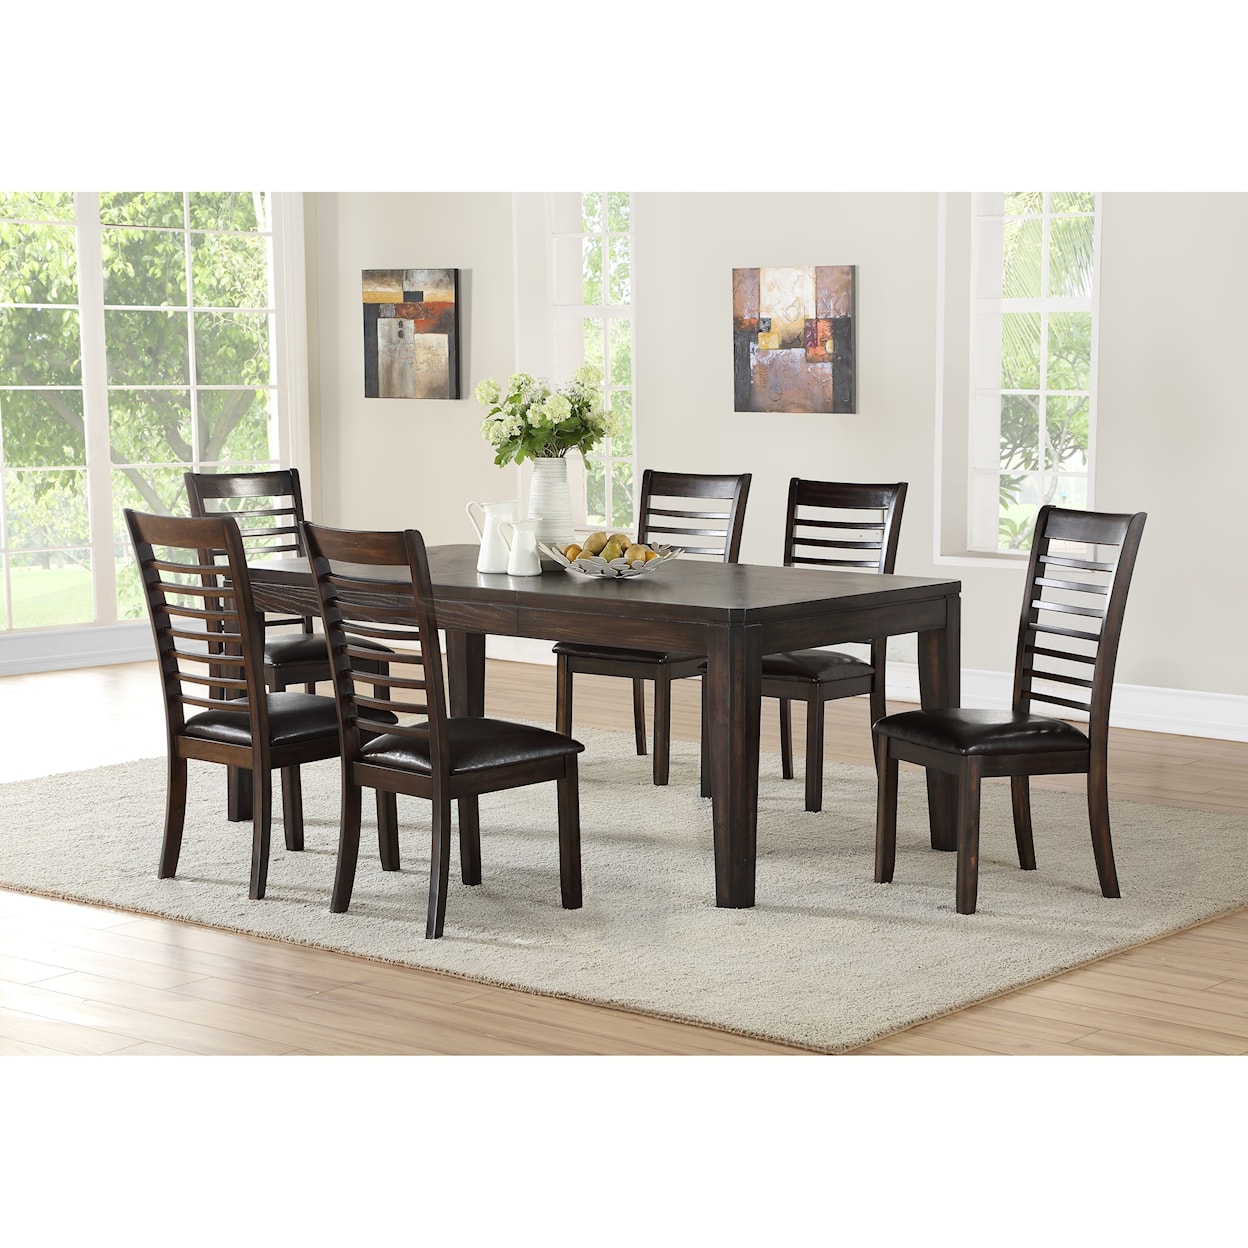 Steve Silver Ally 7 Piece Table and Chair Set